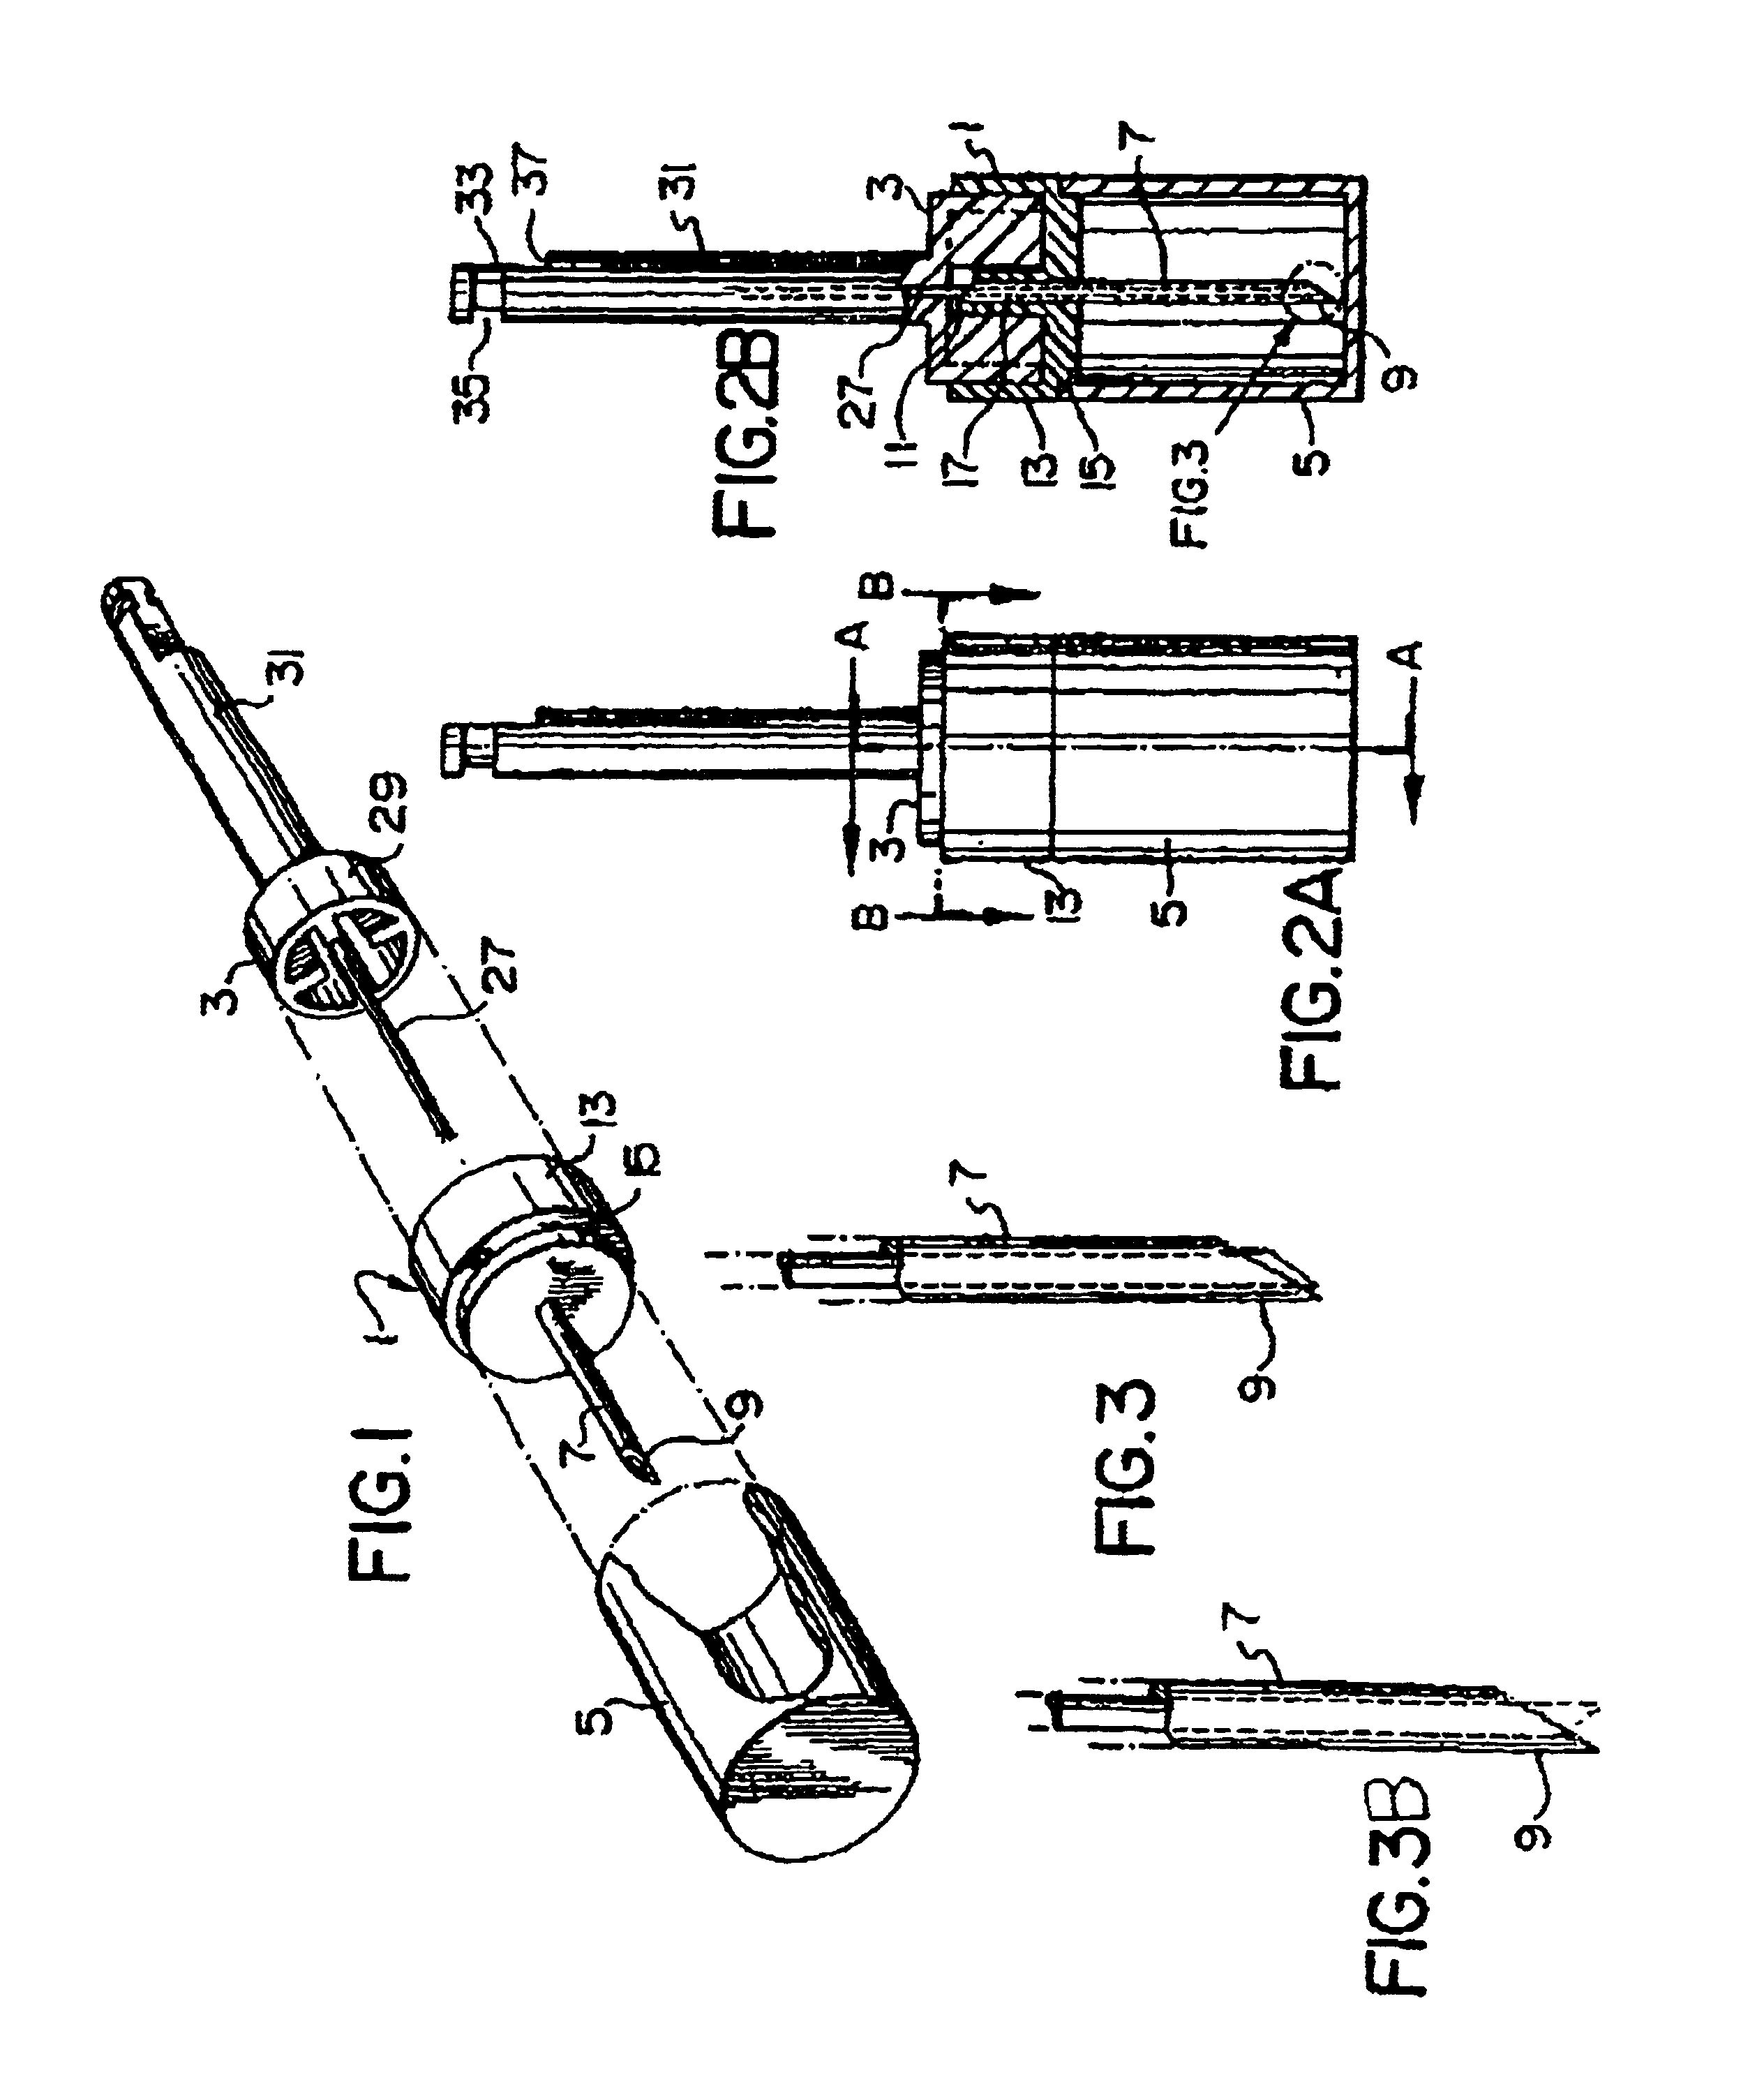 Device for targeted, catheterized delivery of medications